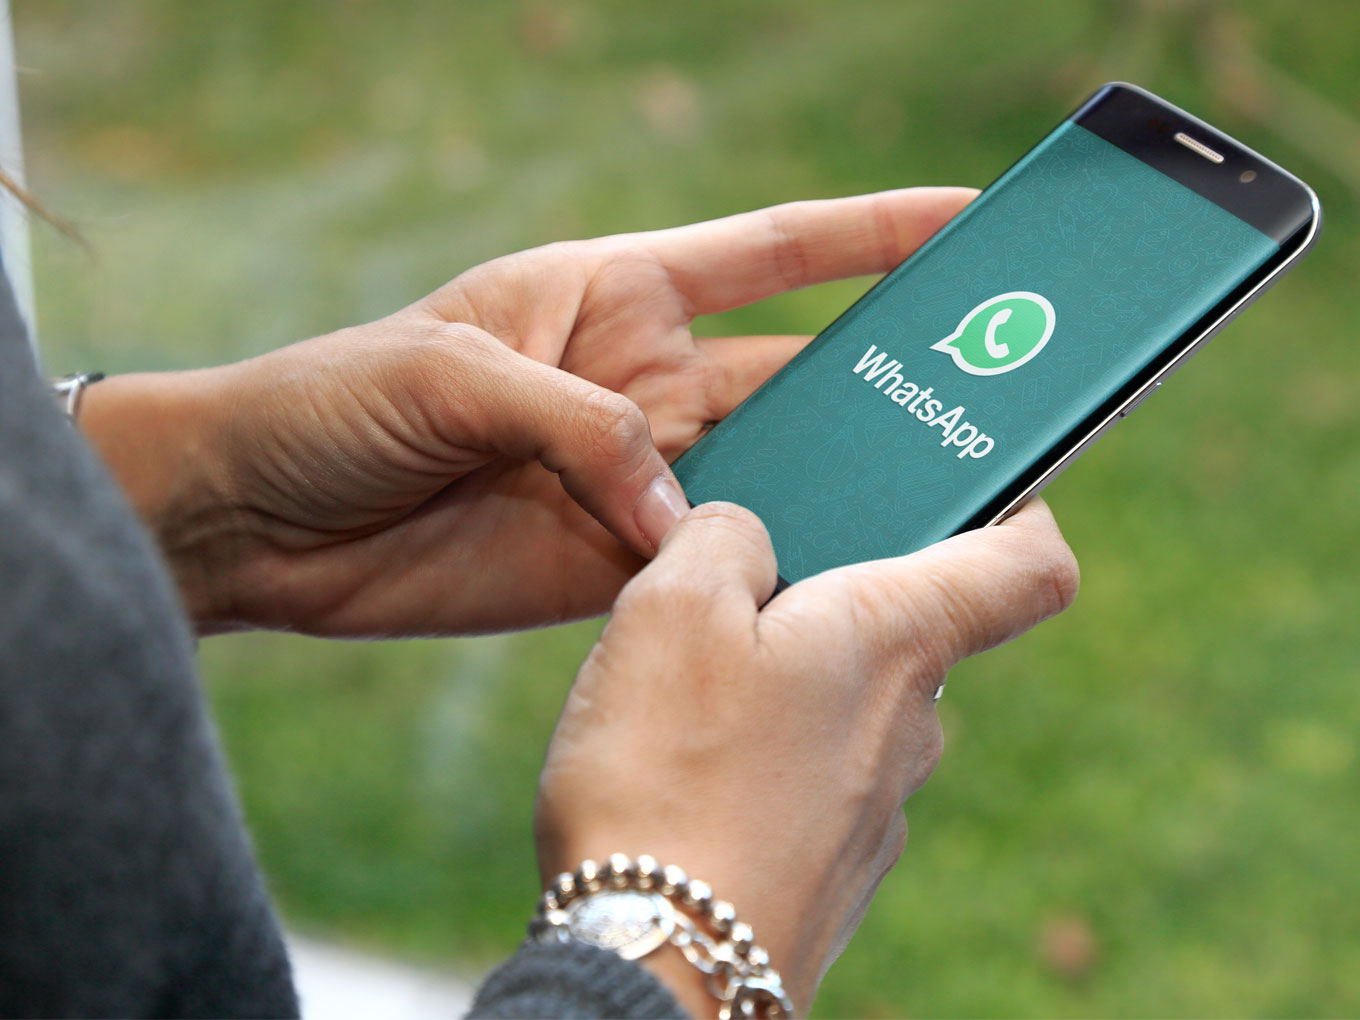 WhatsApp To Sue Anyone Using Bulk Or Automated Messaging To Spam Users